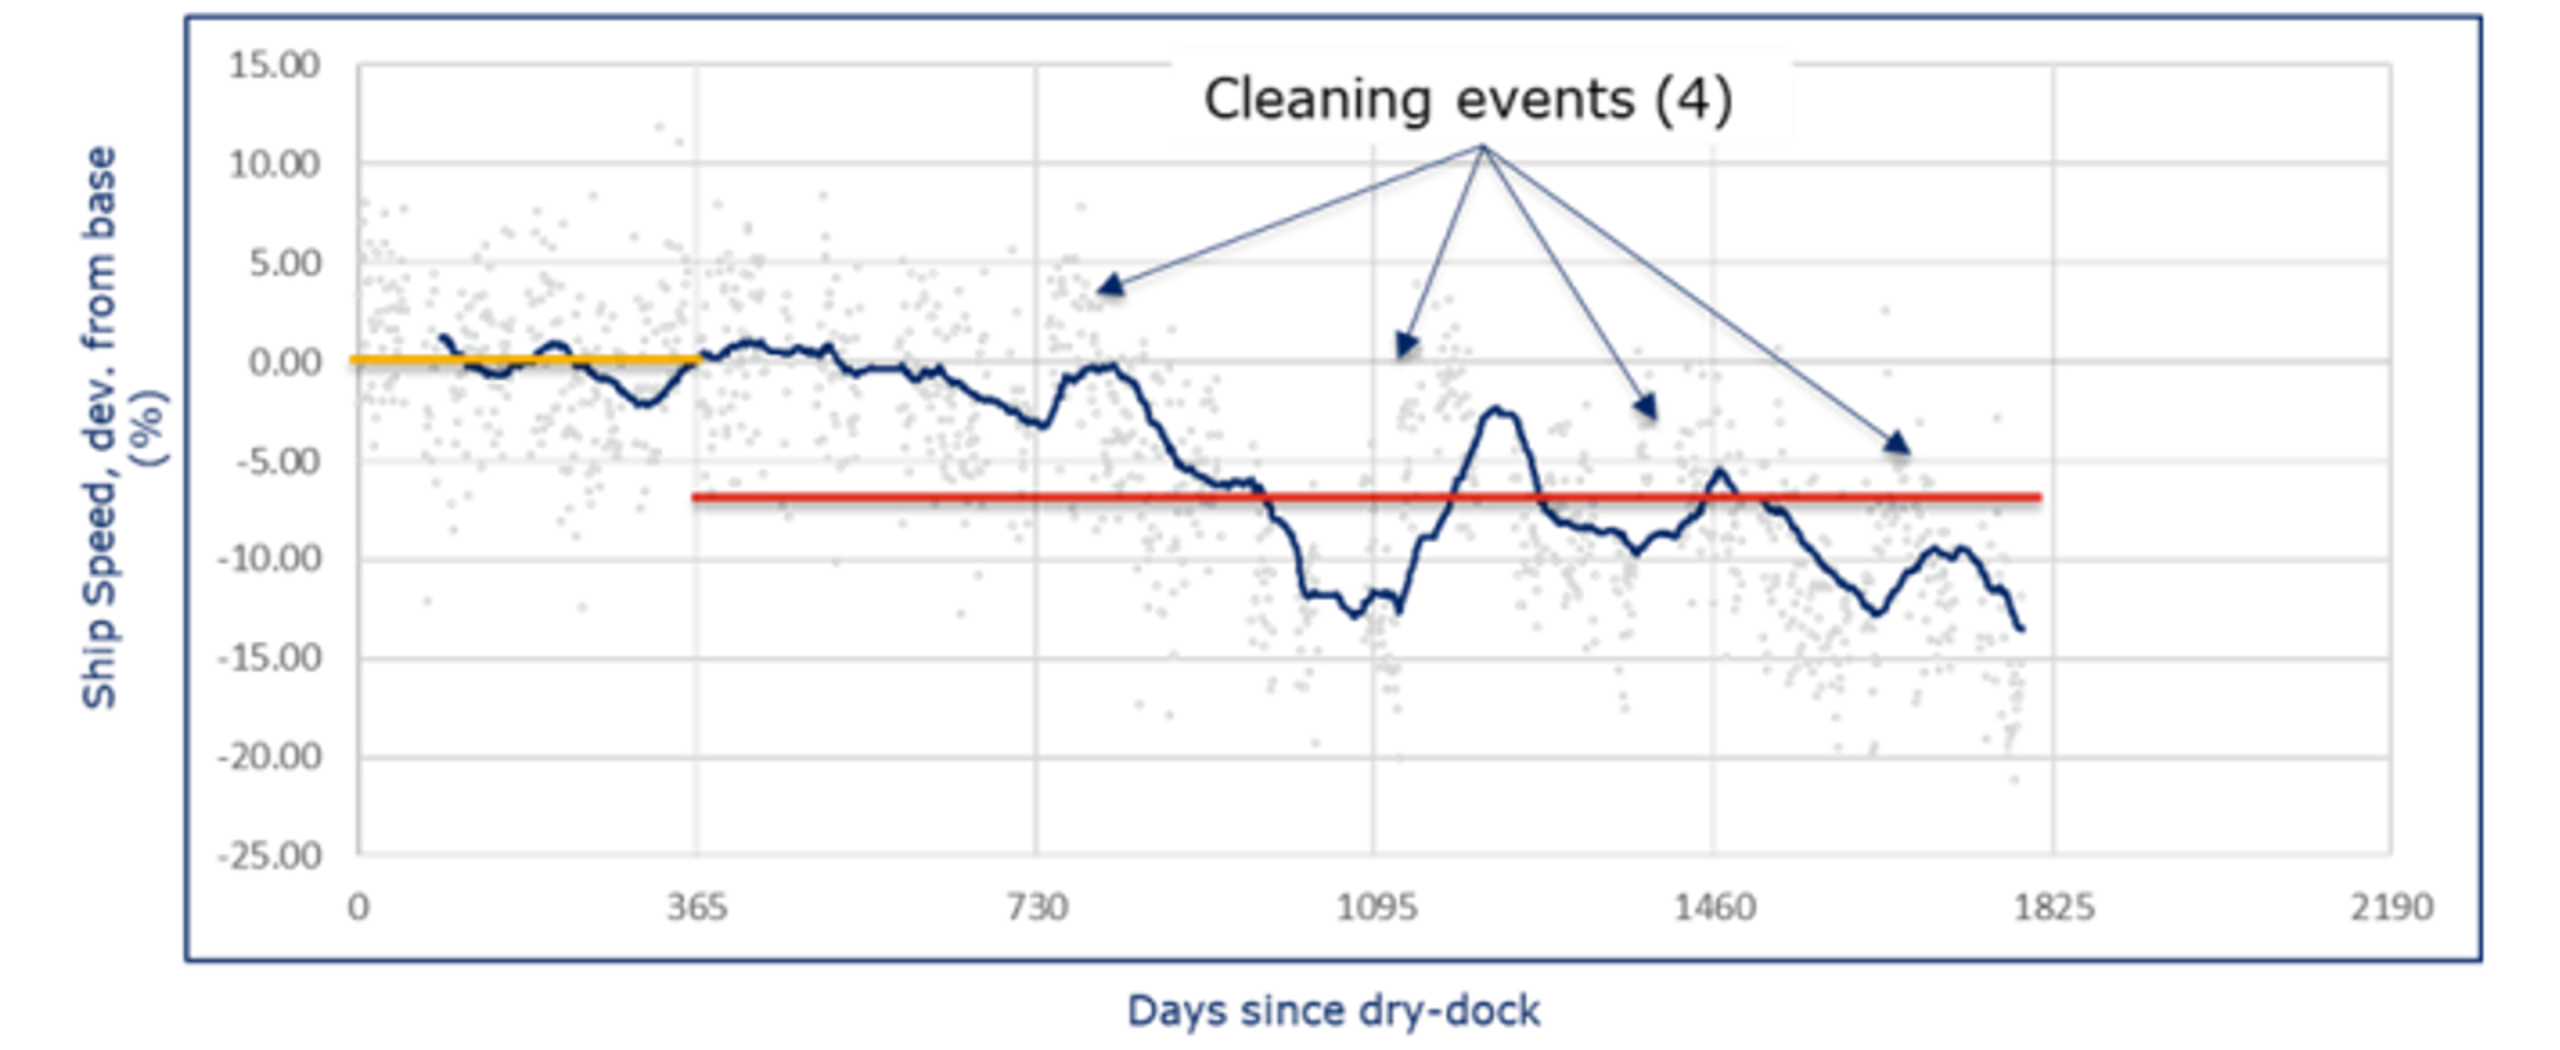 Real-life example of changes in hull performance as per ISO 19030-2 on reactively cleaned vessel.